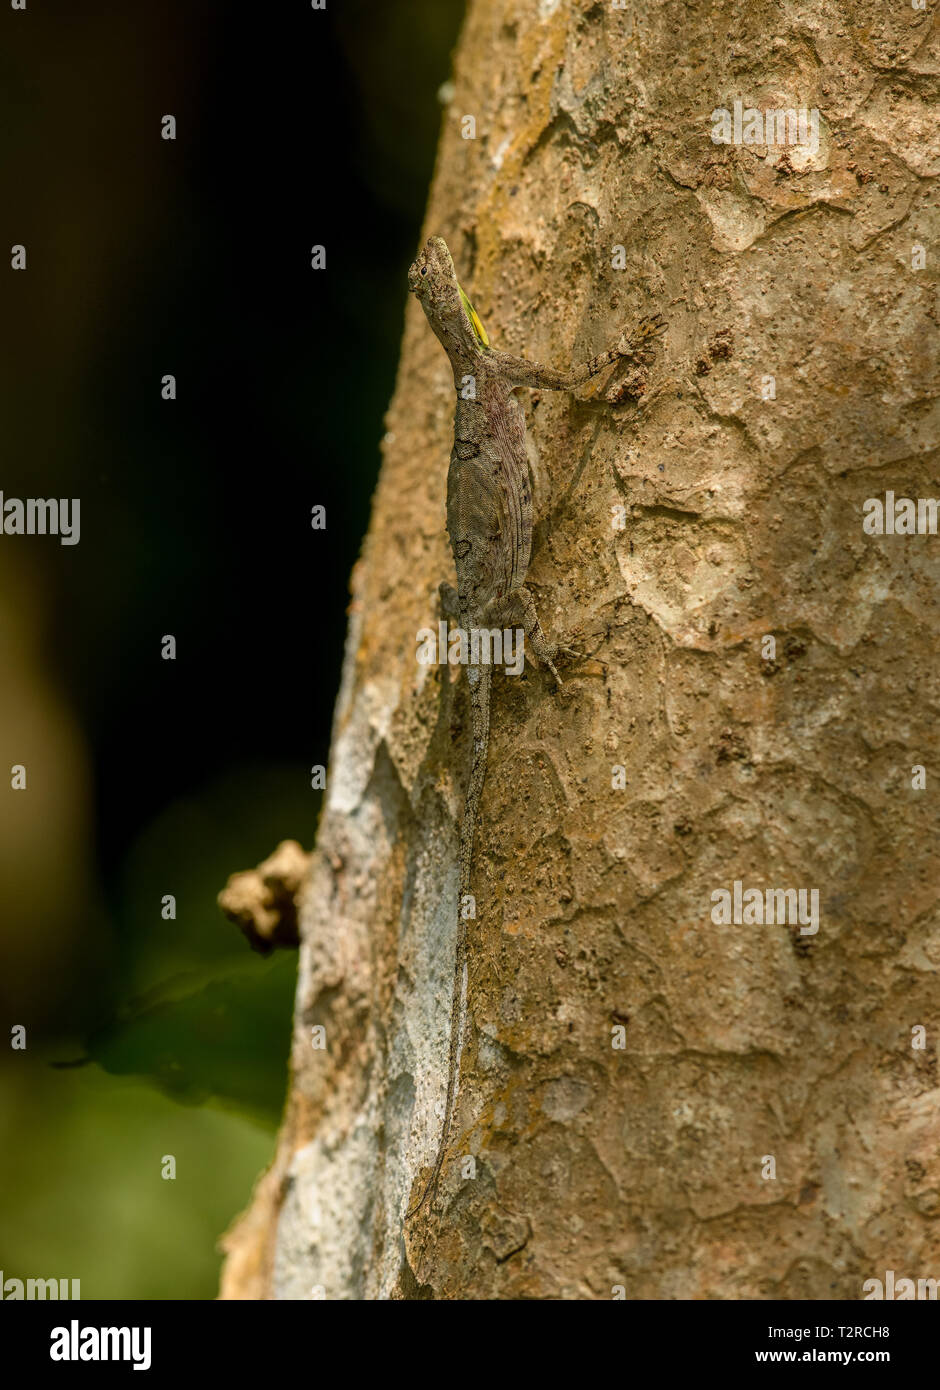 a flying lizard or flying dragon (Draco) perching on tree with green nature blurred background. Stock Photo